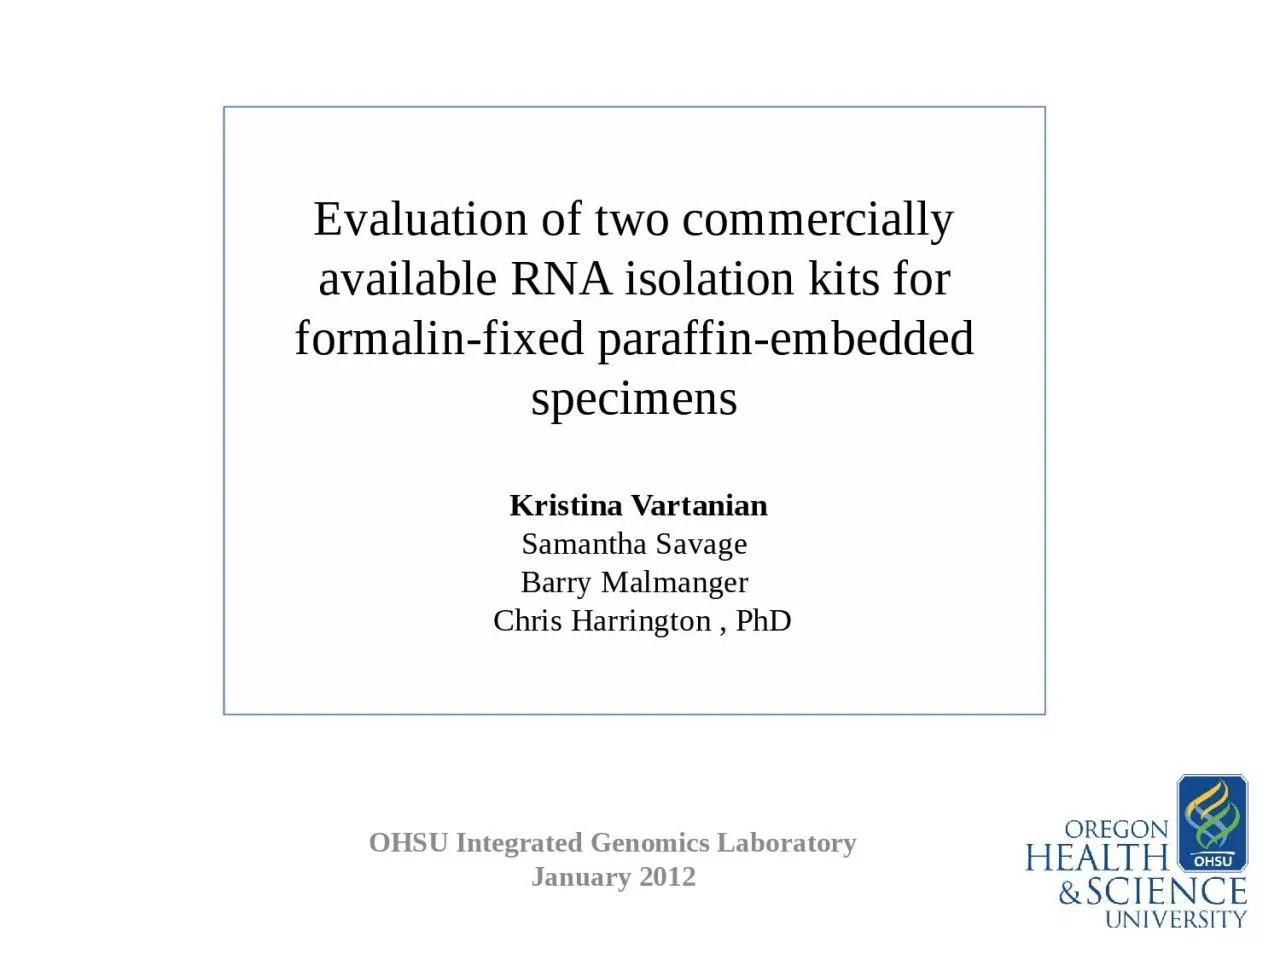 Evaluation of two commercially available RNA isolation kits for formalin-fixed paraffin-embedded